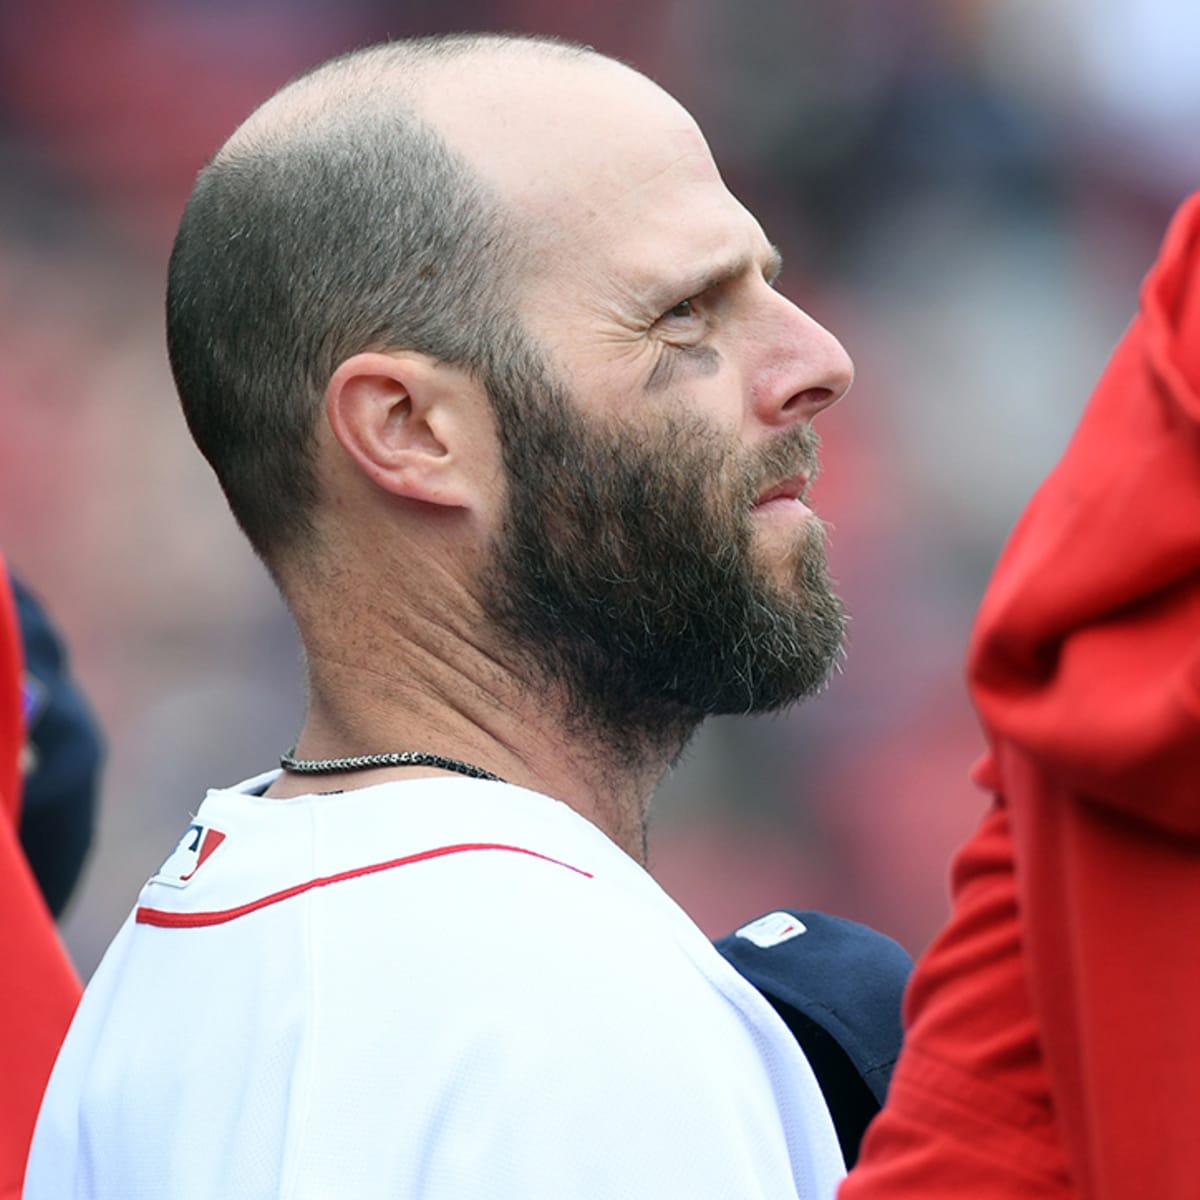 Dustin Pedroia retires: Red Sox star calls it a career after 17